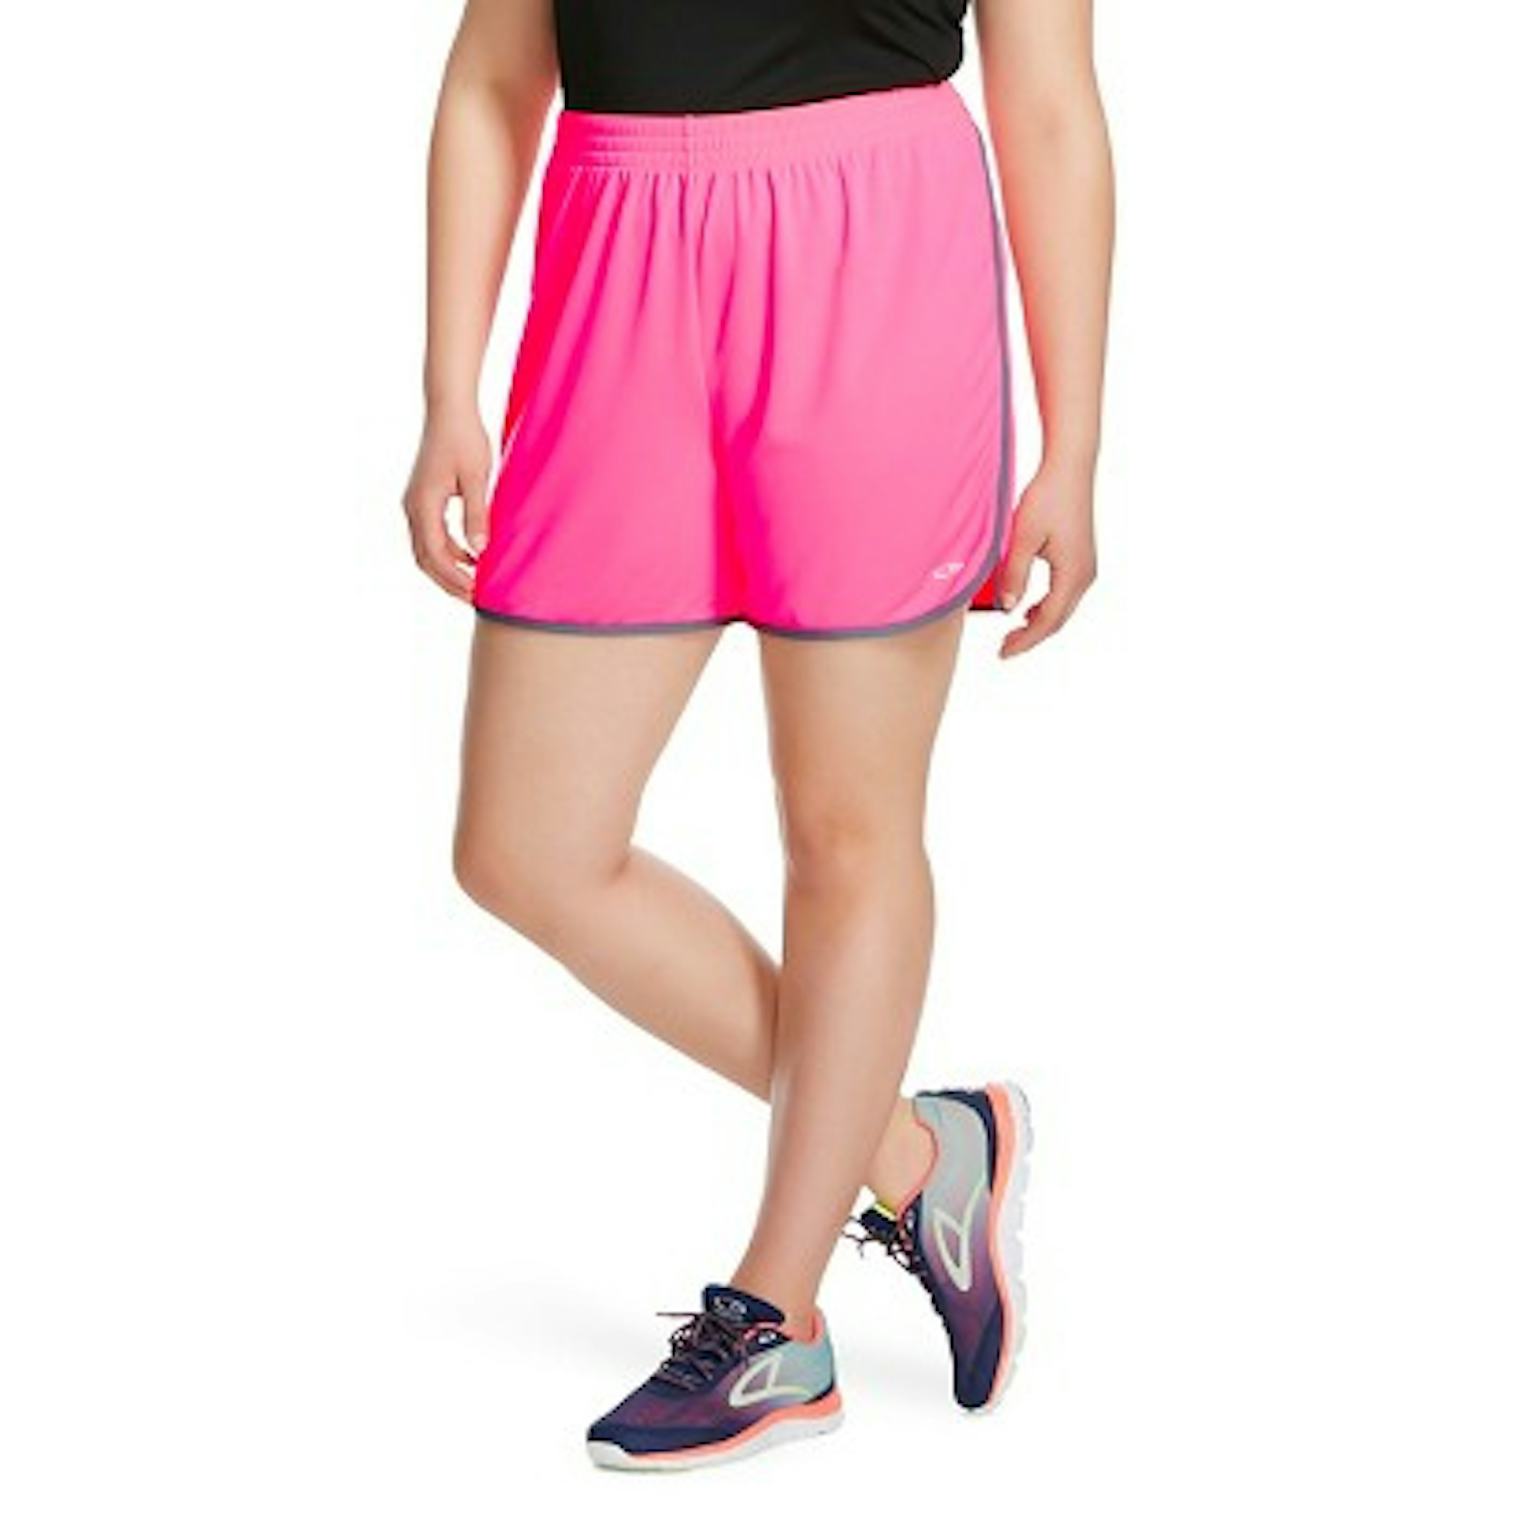 11 Shorts That Sweaty People Will Actually Enjoy Wearing All Summer